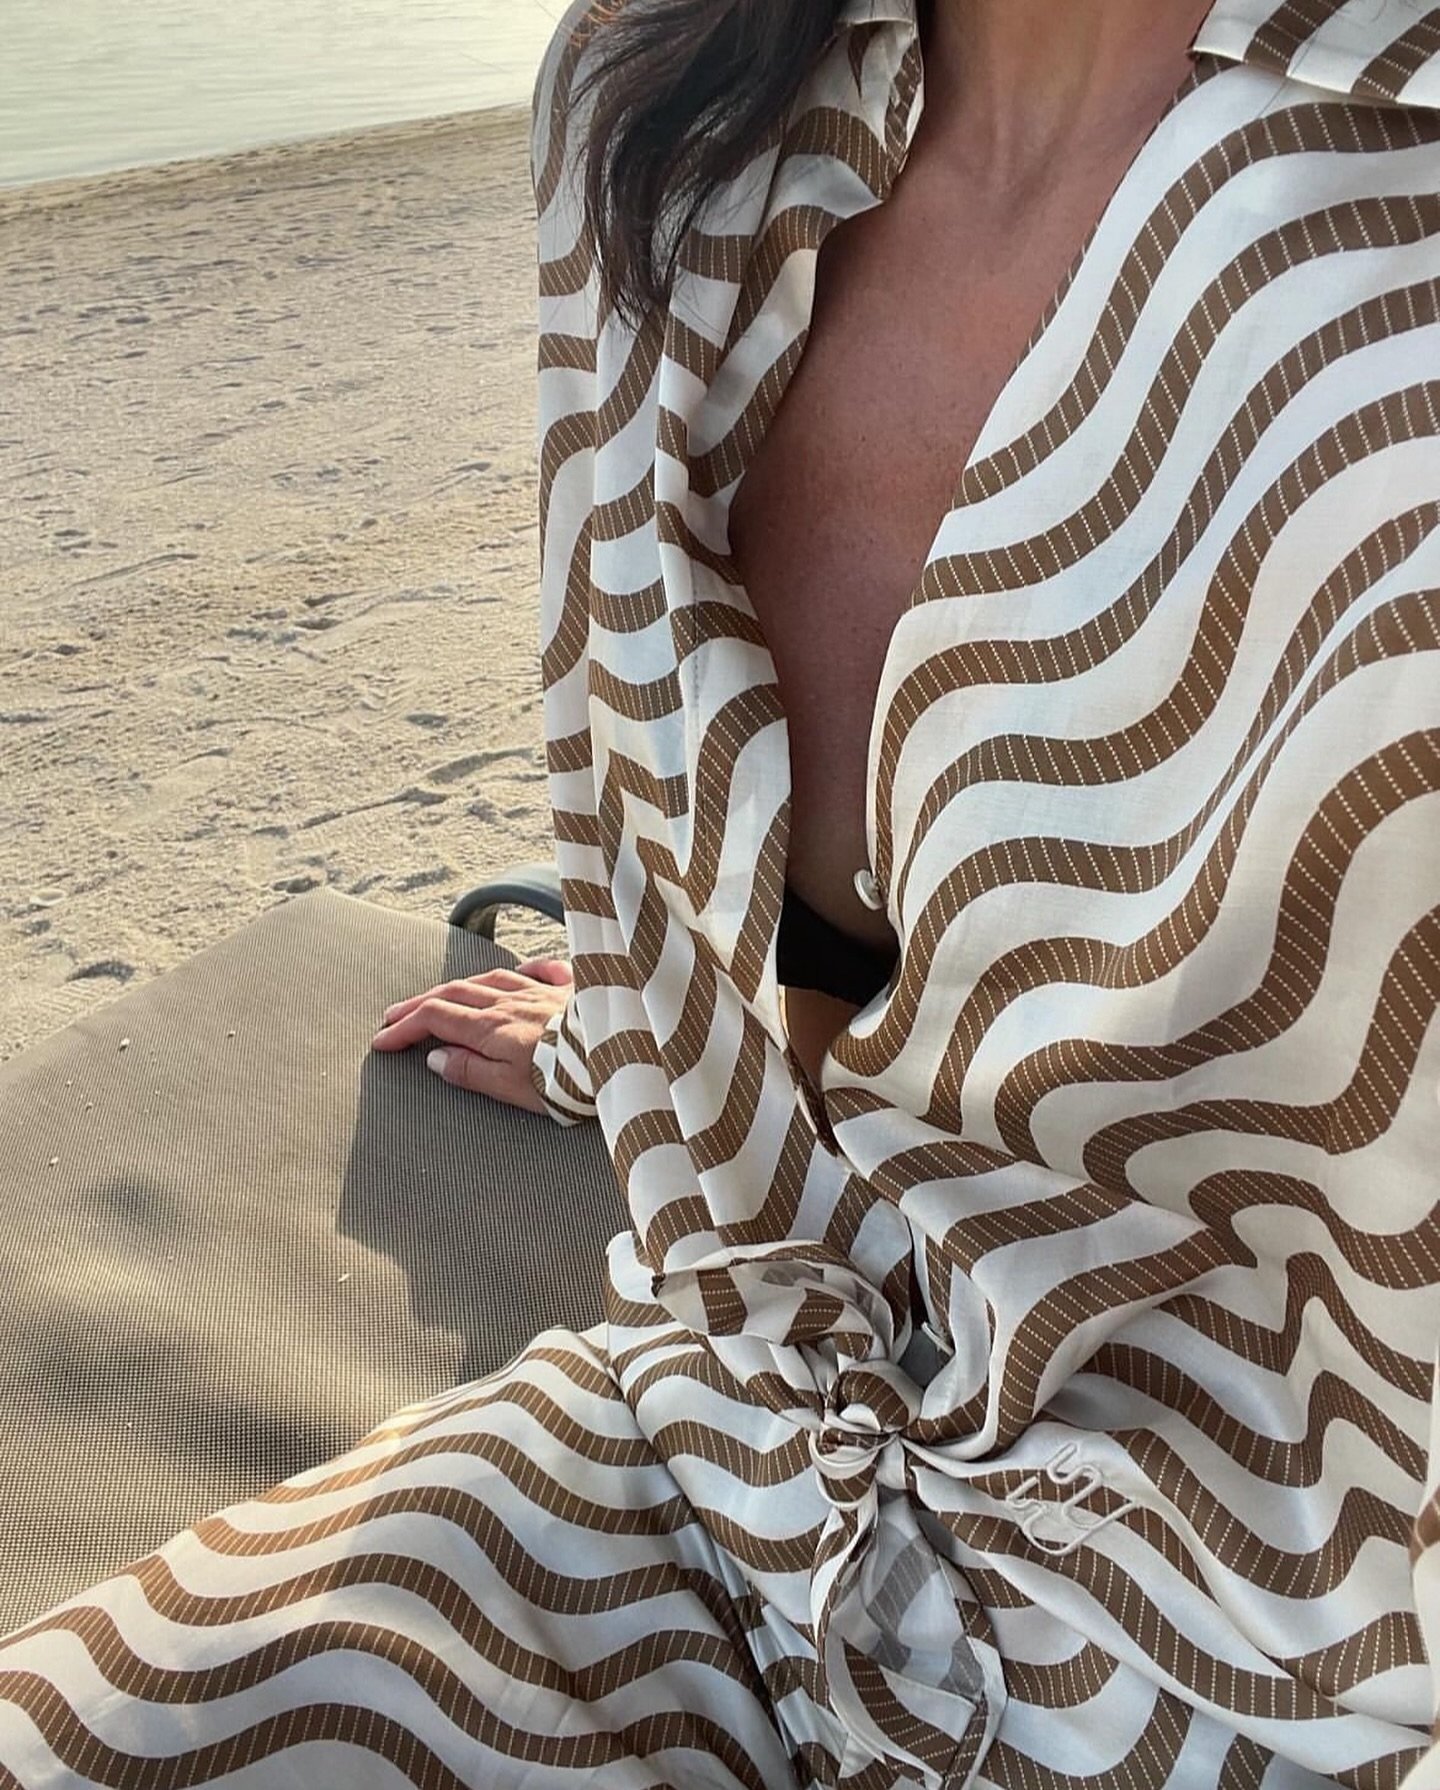 We prefer our beach attire to echo the essence of our holidays: relaxed, effortless and perfectly coordinated. Discover our Sunny Sets edit, including Yaitte&lsquo;s minimalistic wave pattern co-ords that scream coastal cool. 

Image: @yaitte_ 

#lif